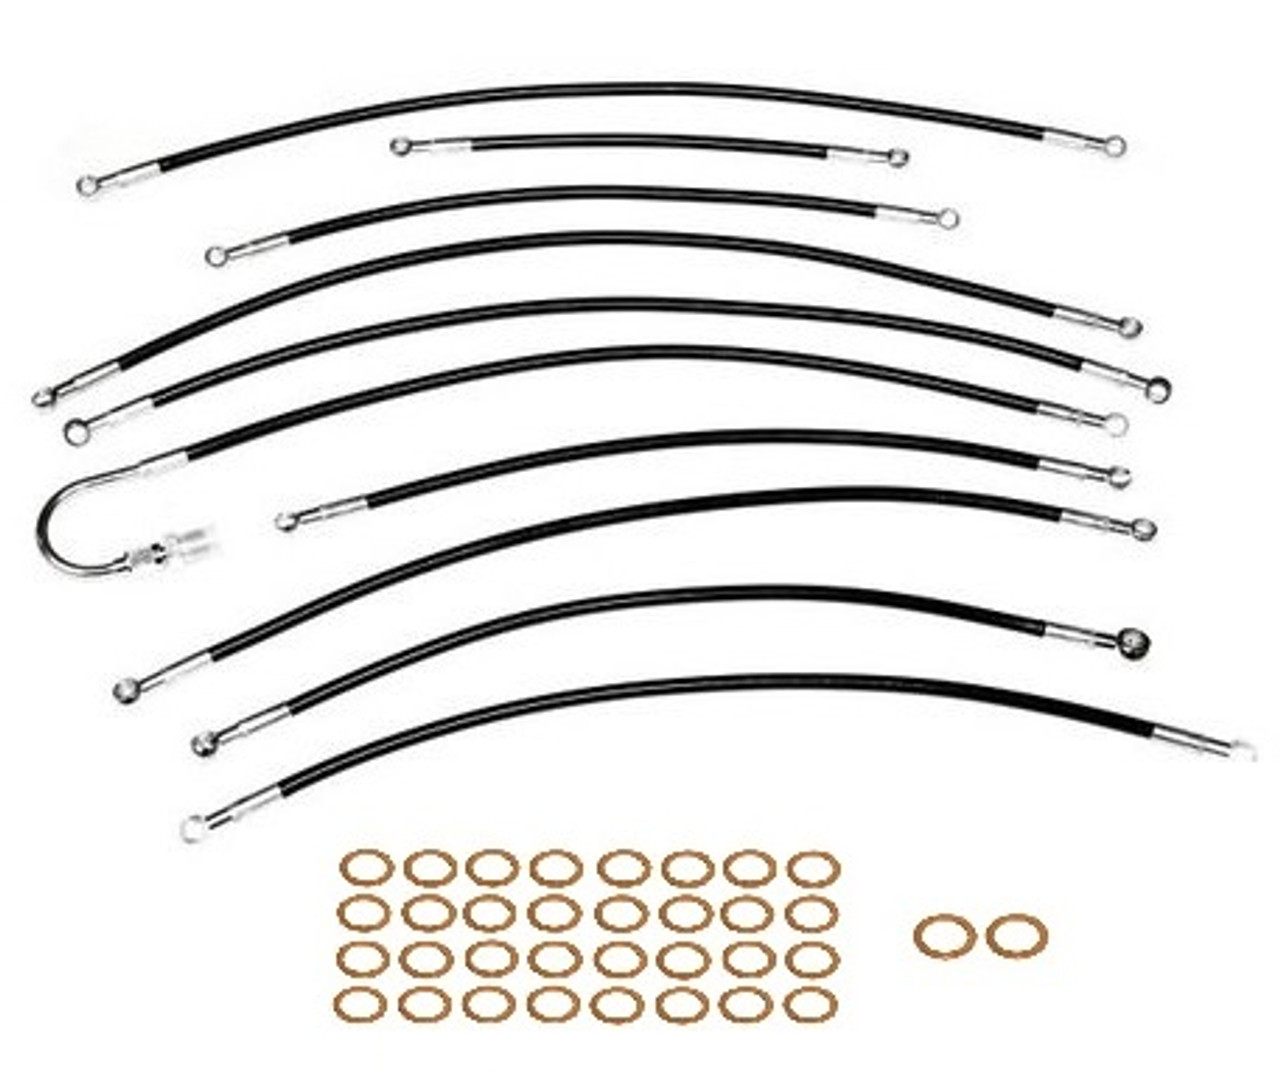 Black Coated Premium Stainless Braided Fuel Lines / Fuel Hoses (set of 9) -  DeLorean Parts Canada